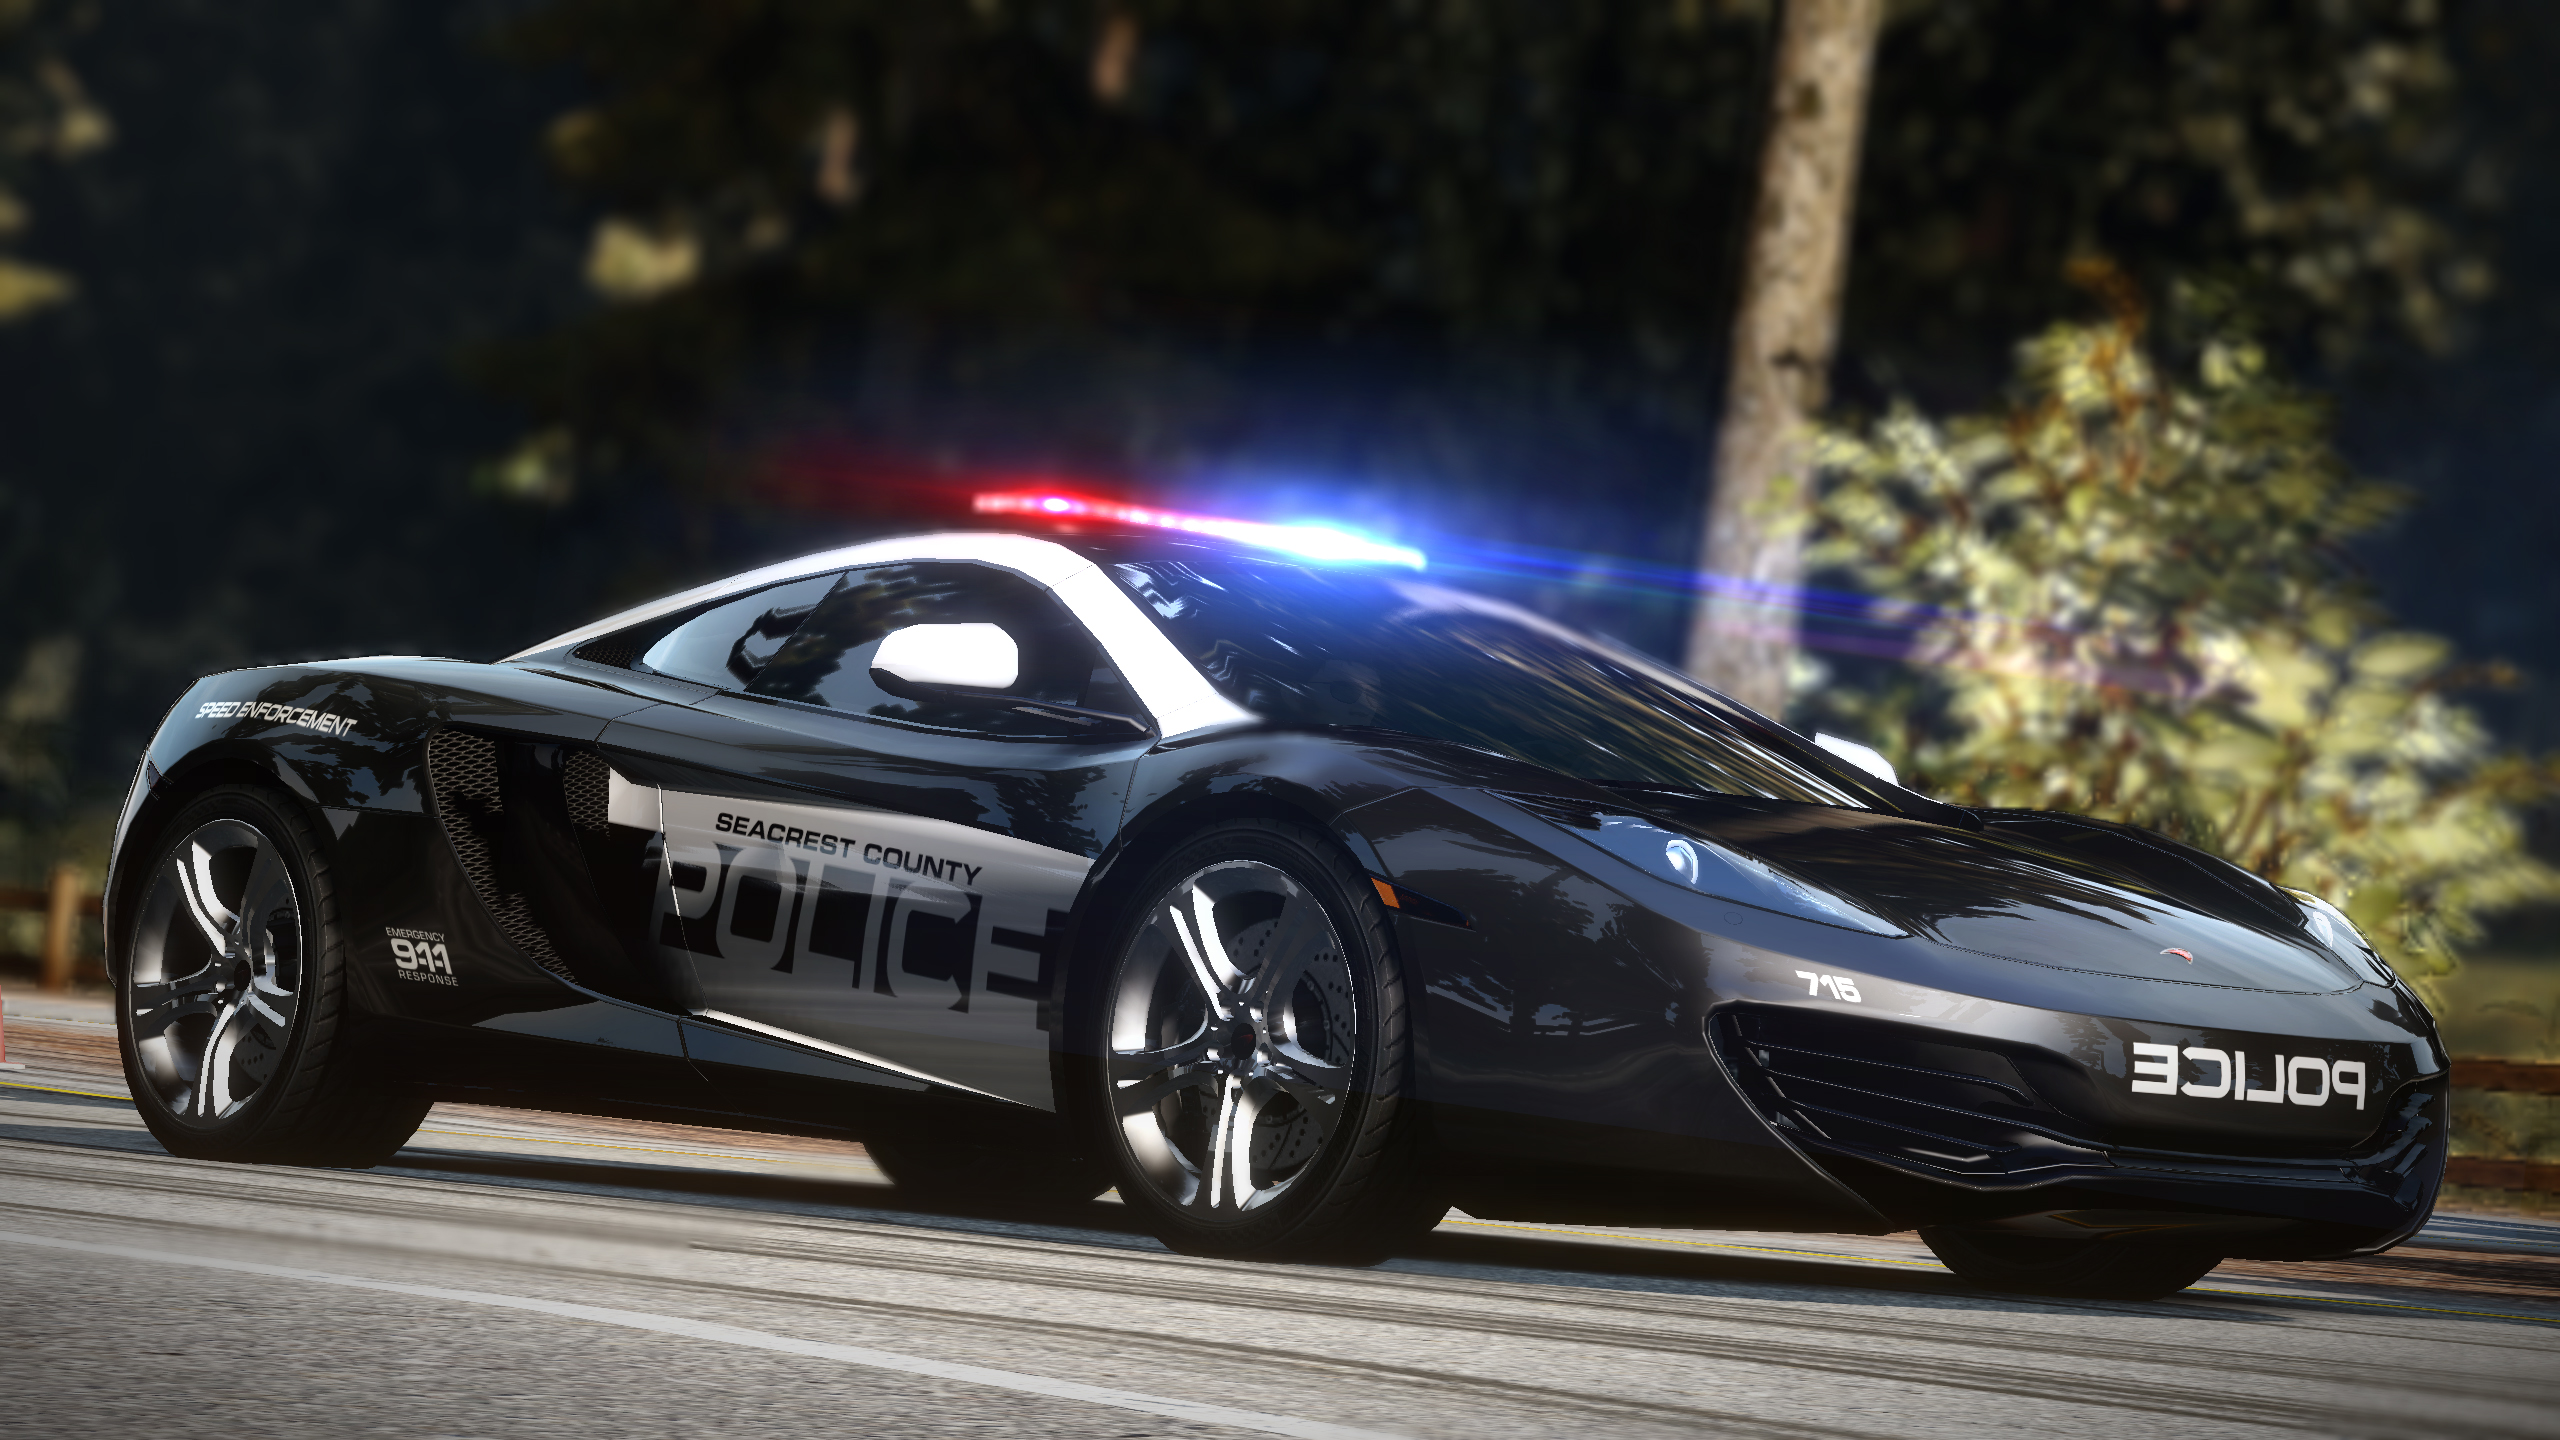 Video Game Need For Speed: Hot Pursuit HD Wallpaper | Background Image